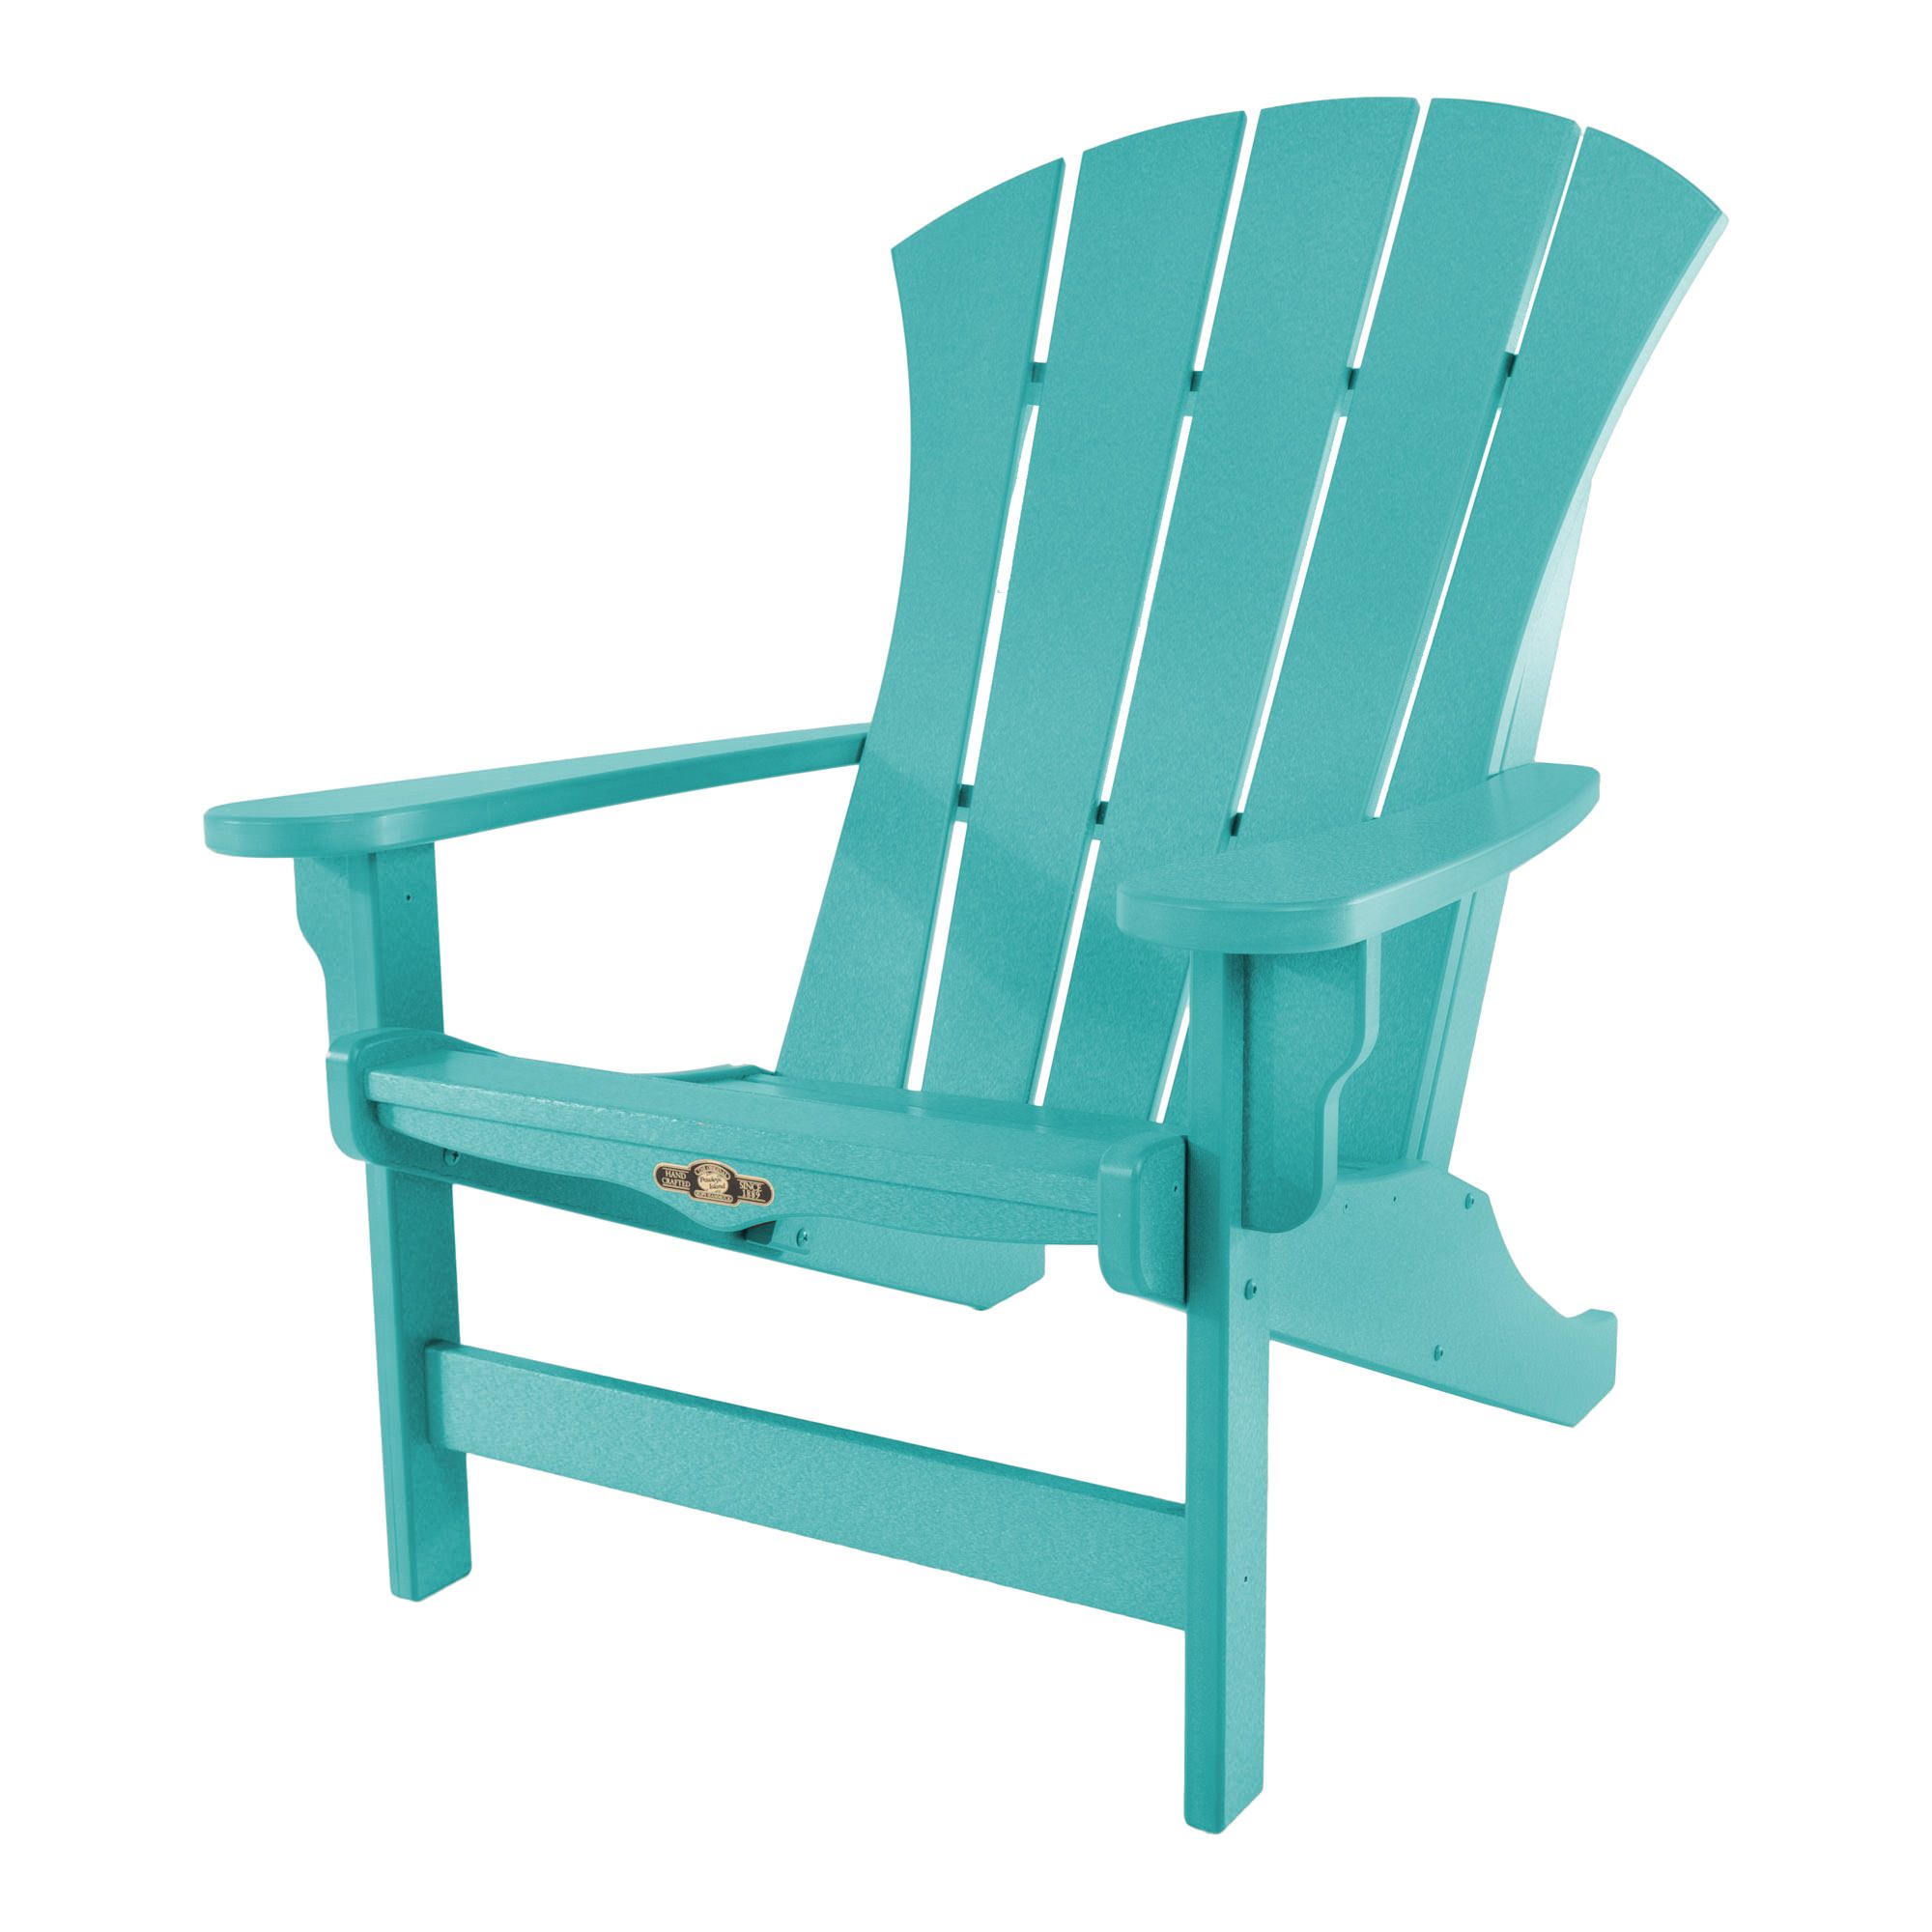 Albums 104+ Pictures Pictures Of Adirondack Chairs Completed